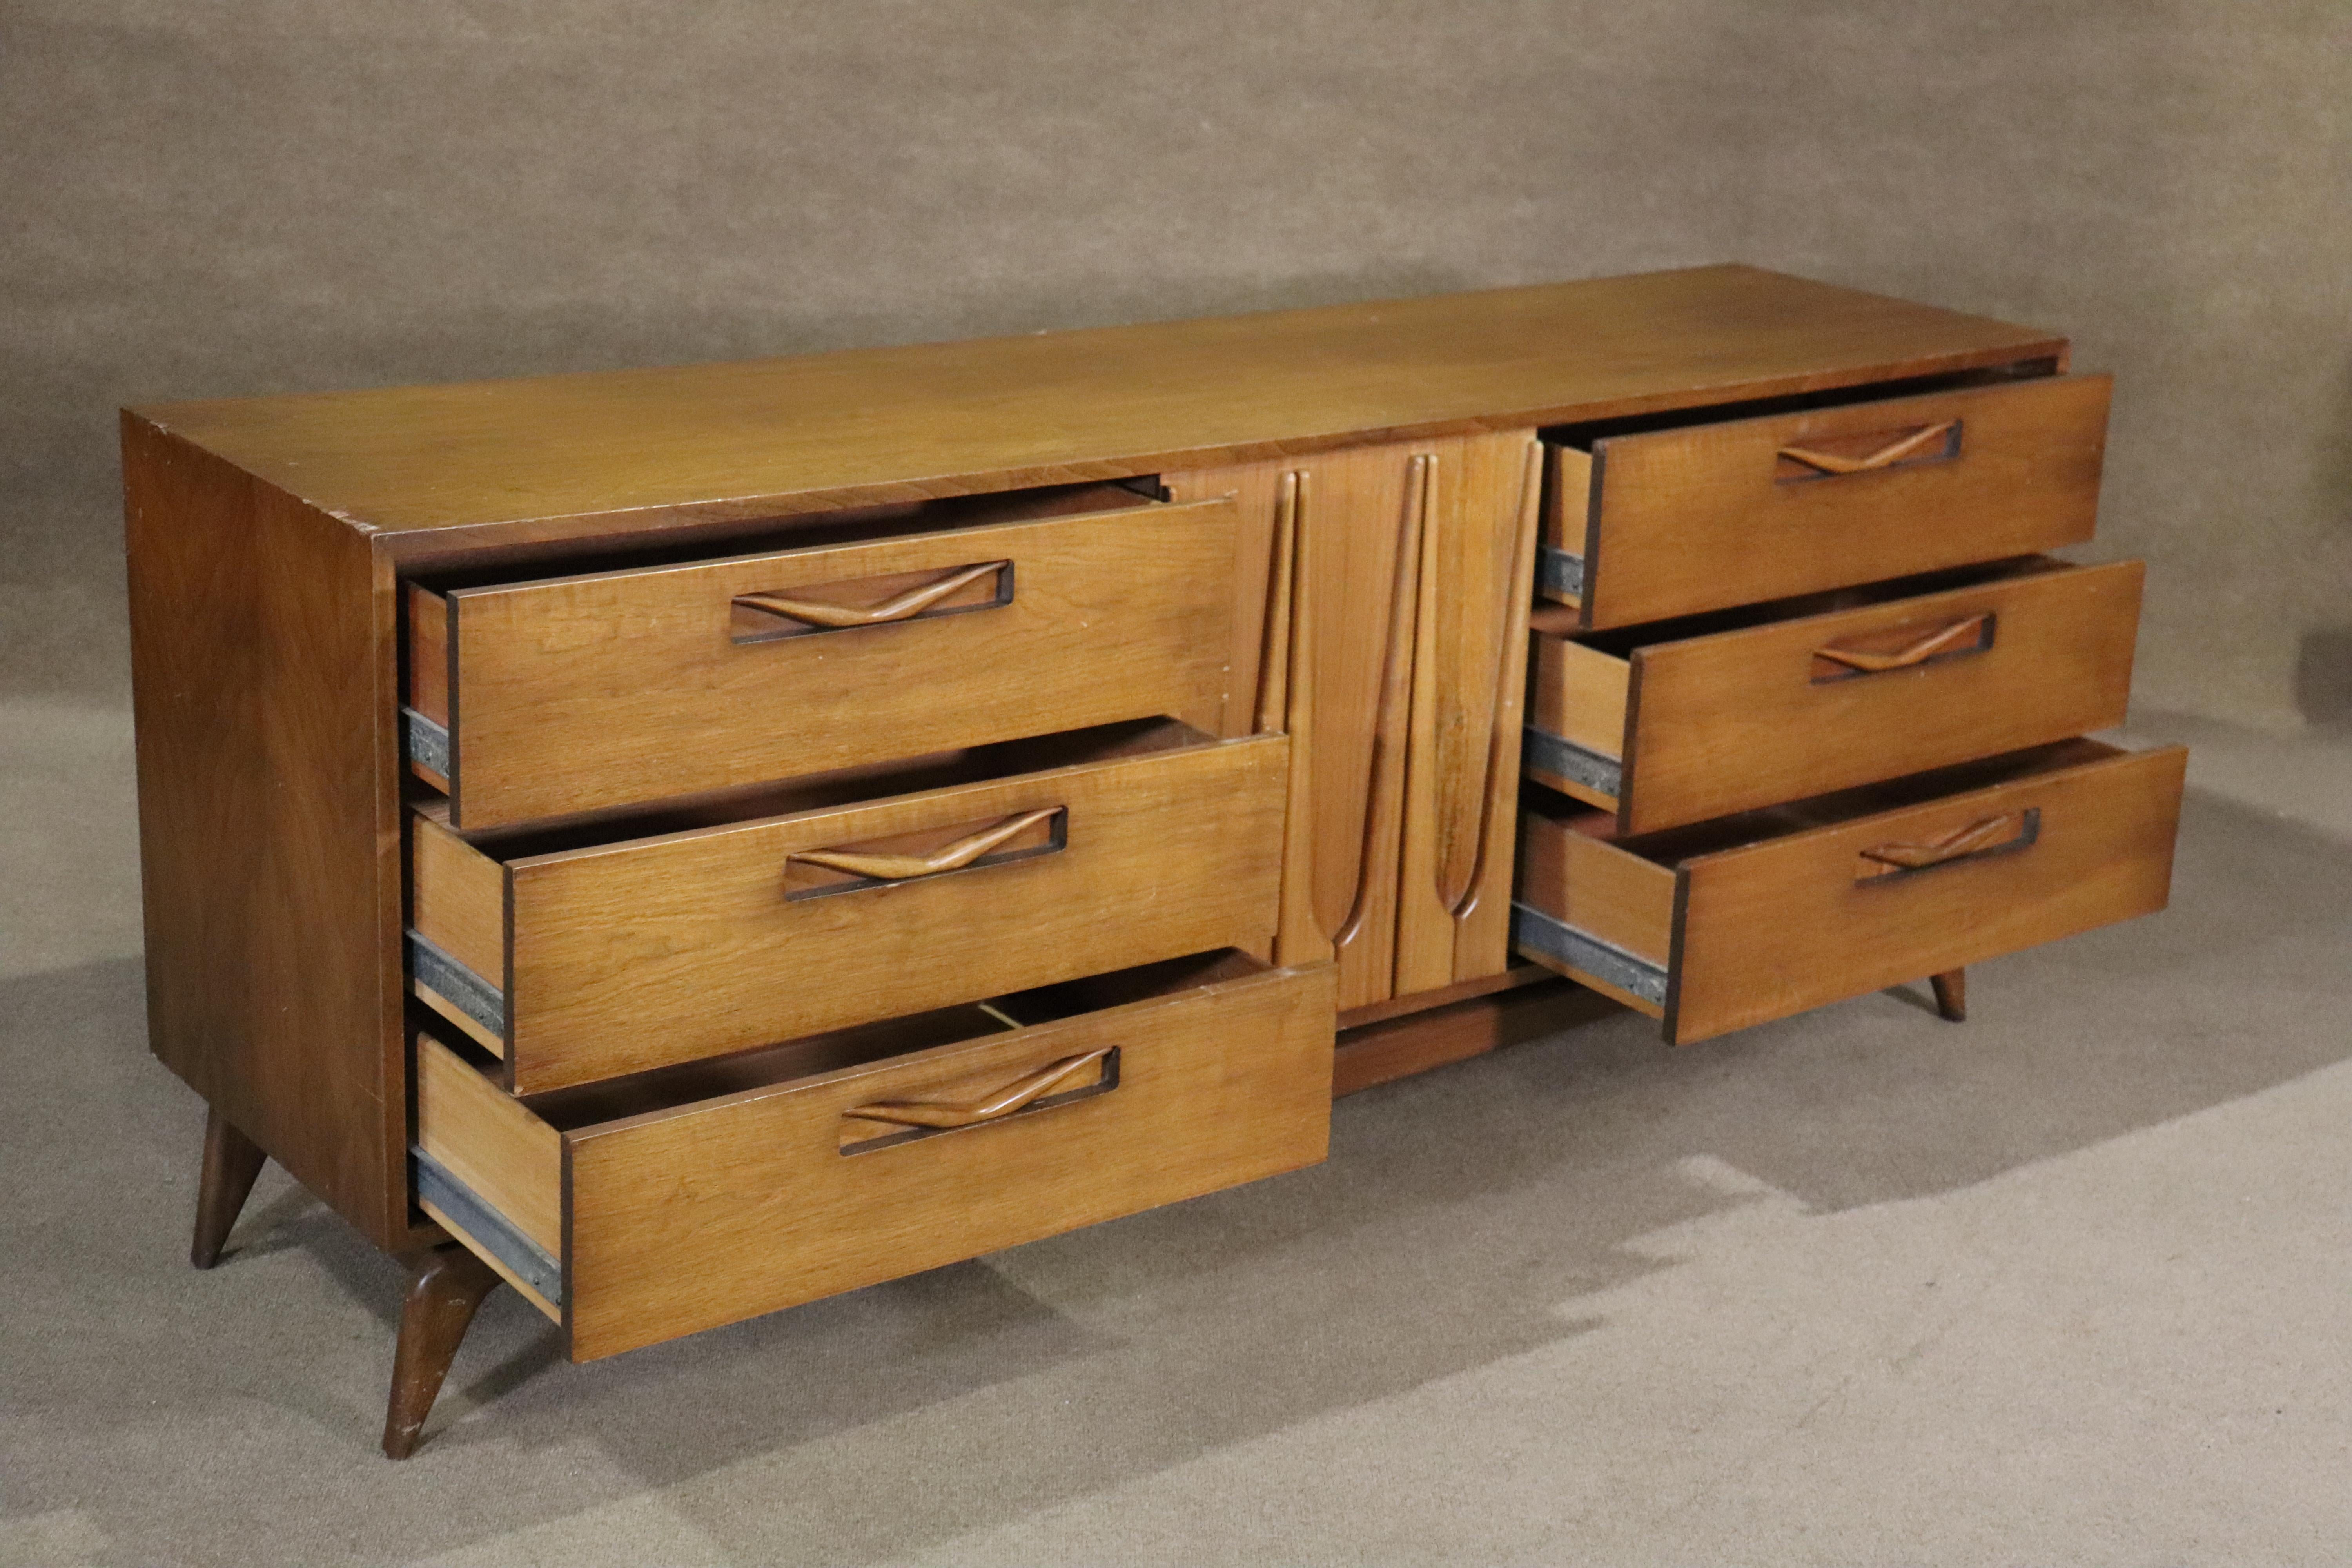 Wonderful Mid-Century Modern dresser with hints of Vladimir Kagan and Broyhill Brasilia in the sculpted wood front and delicate floating legs. Nine total drawers with sliding middle door.
Please confirm location NY or NJ.